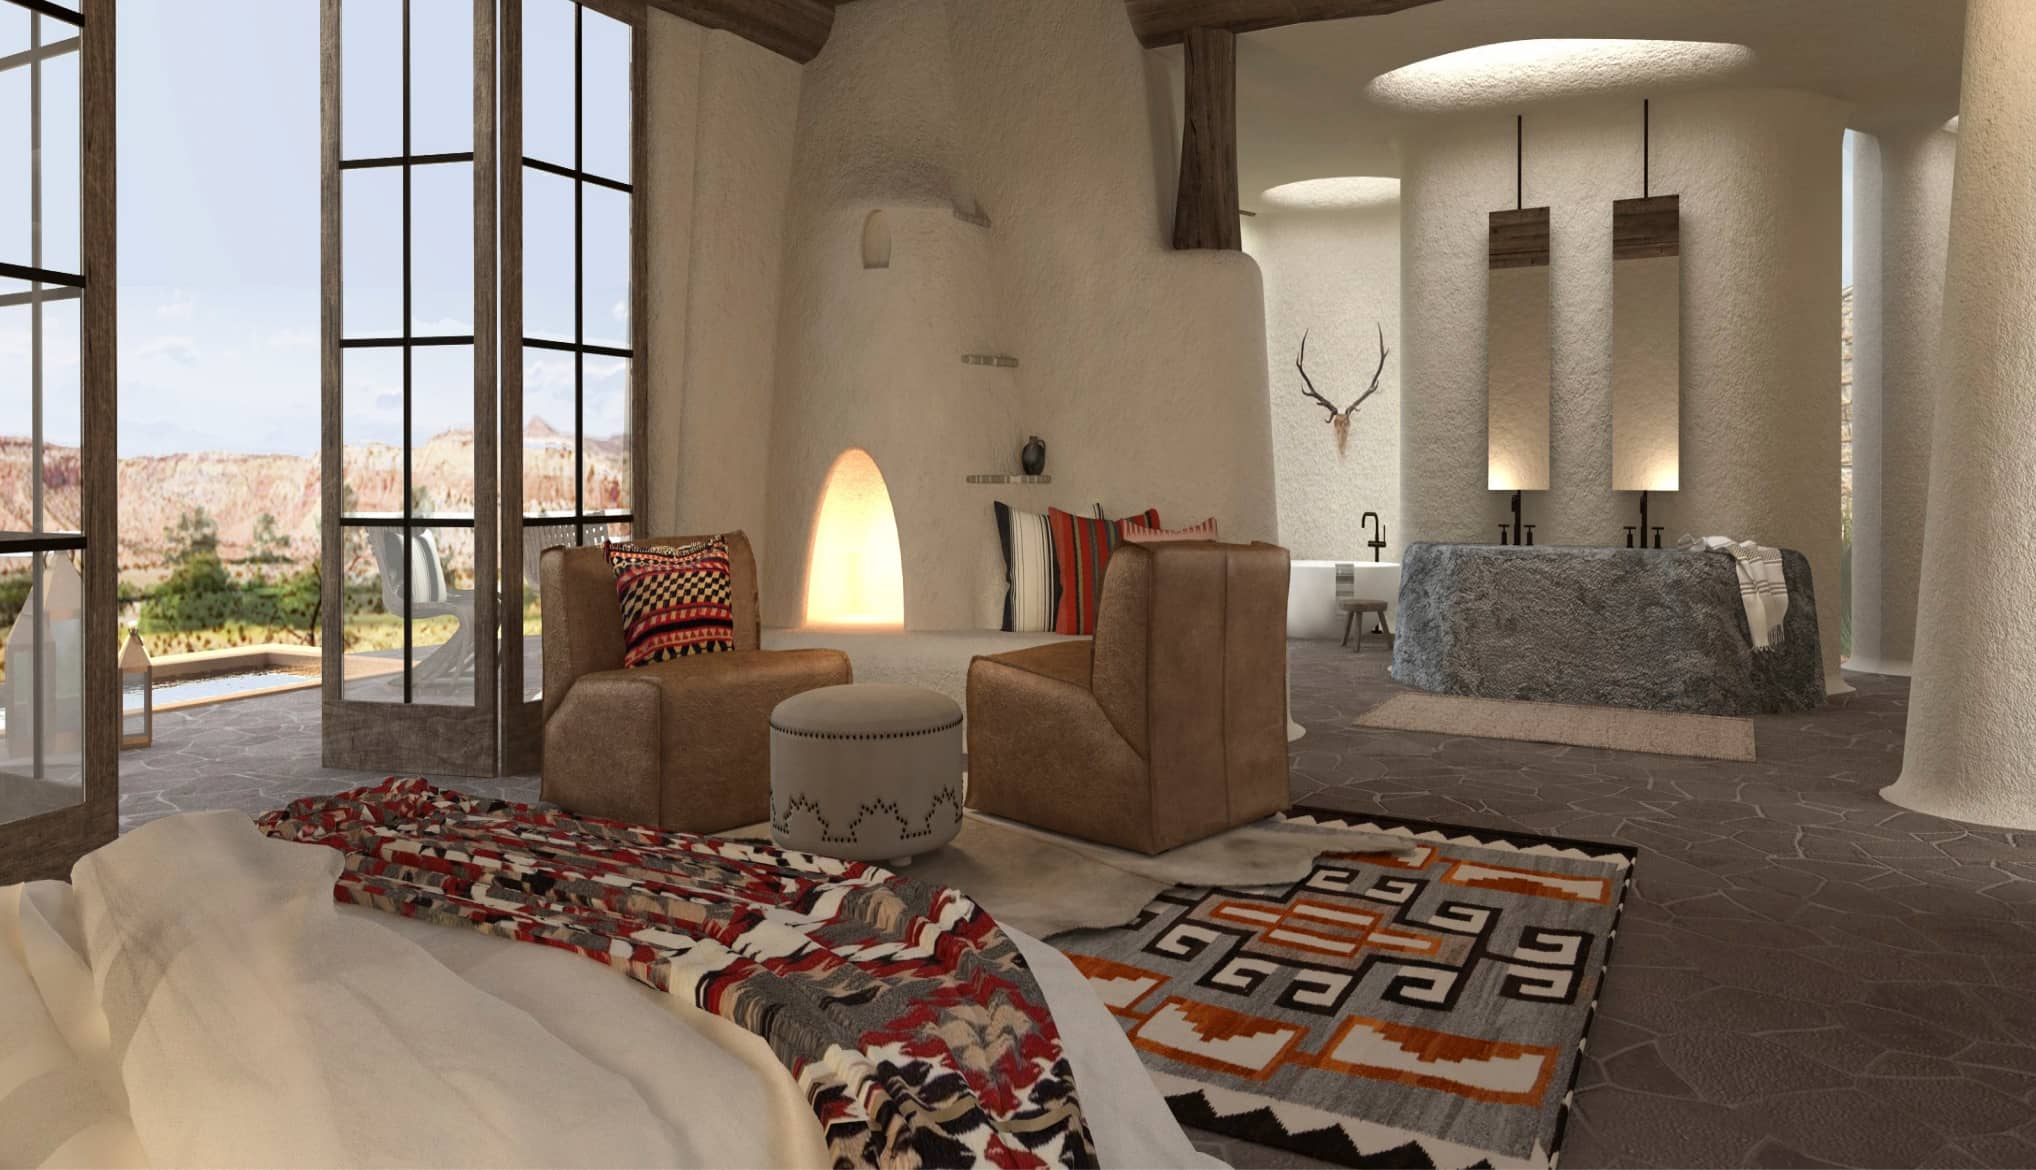 Guest rooms at Bishop’s Lodge are designed with elements that honor the local desert landscape, history and culture. 